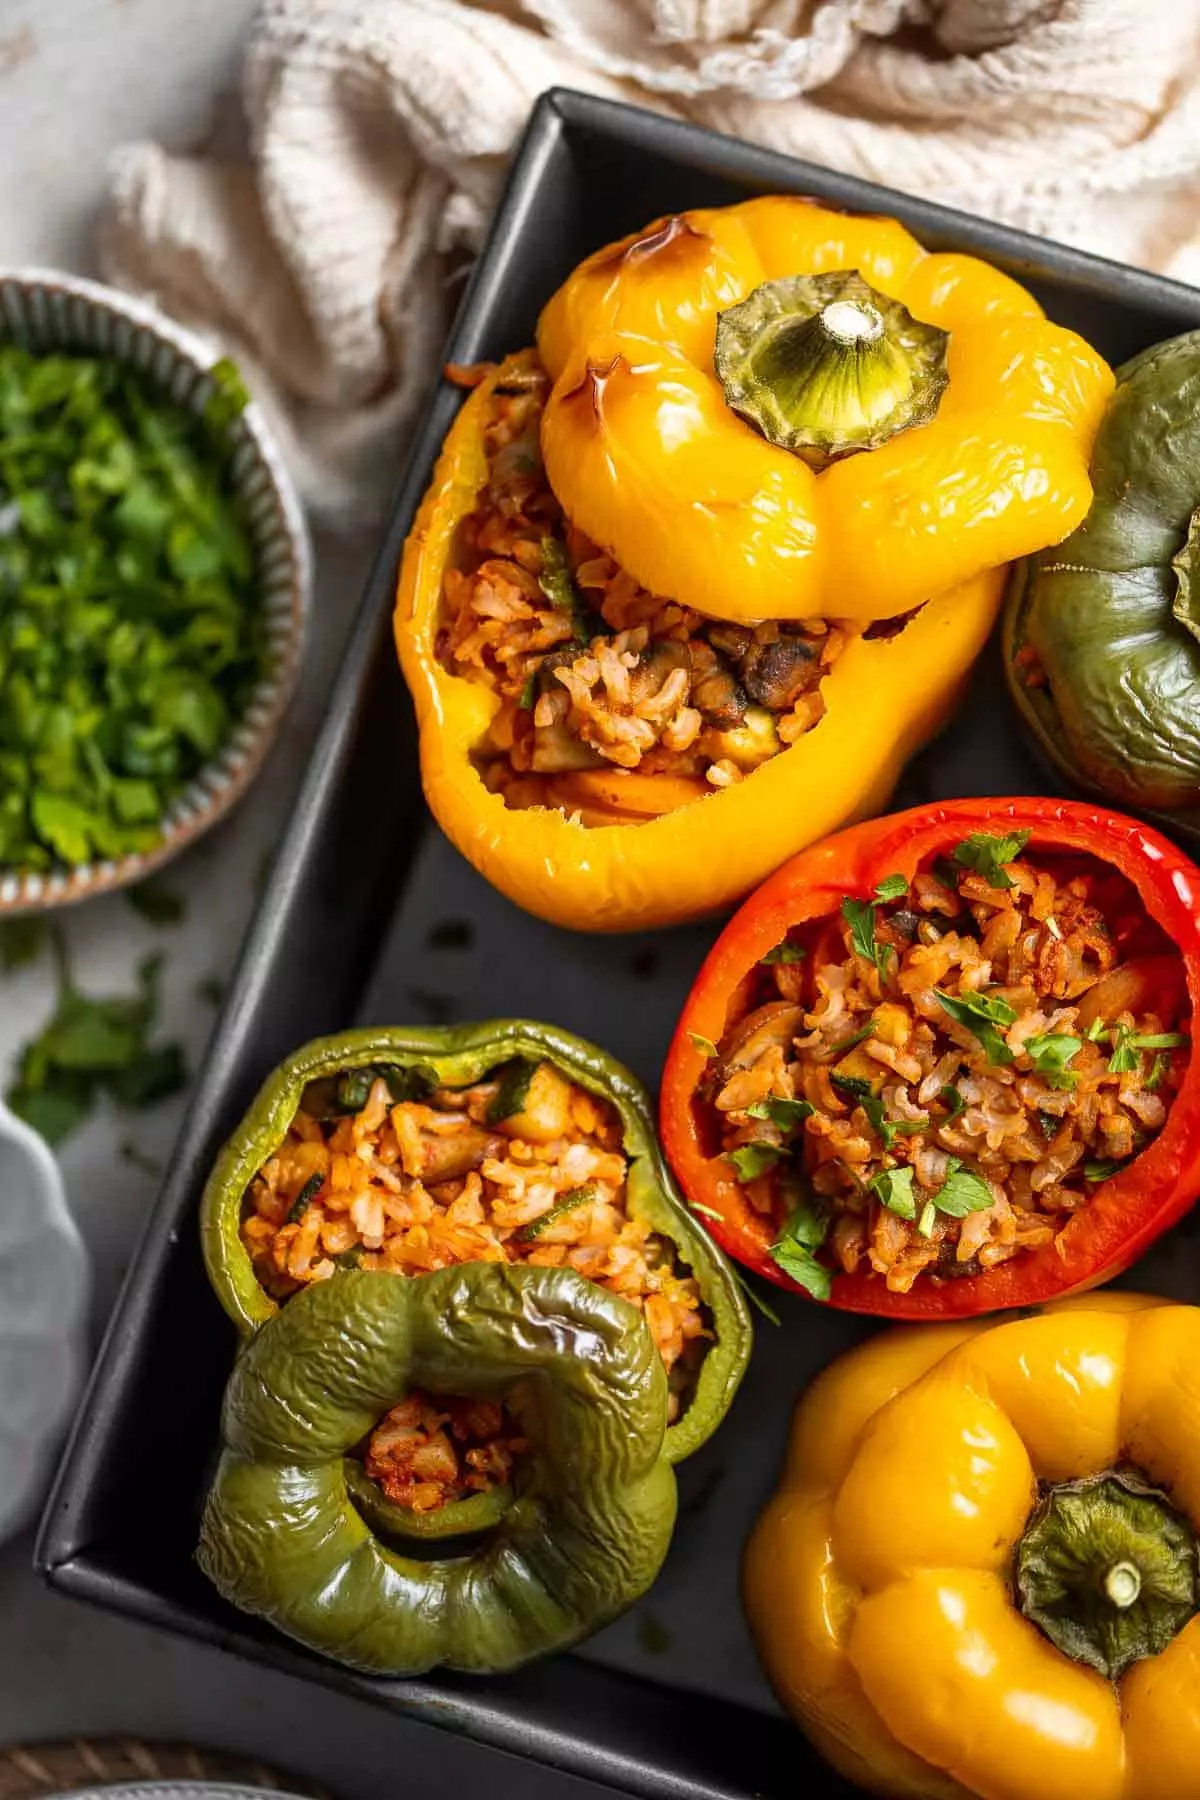 Vegan Stuffed Peppers are stuffed with pan-fried mushrooms, tender rice, and veggies, making them flavorful and filling. Easy to make in under an hour!